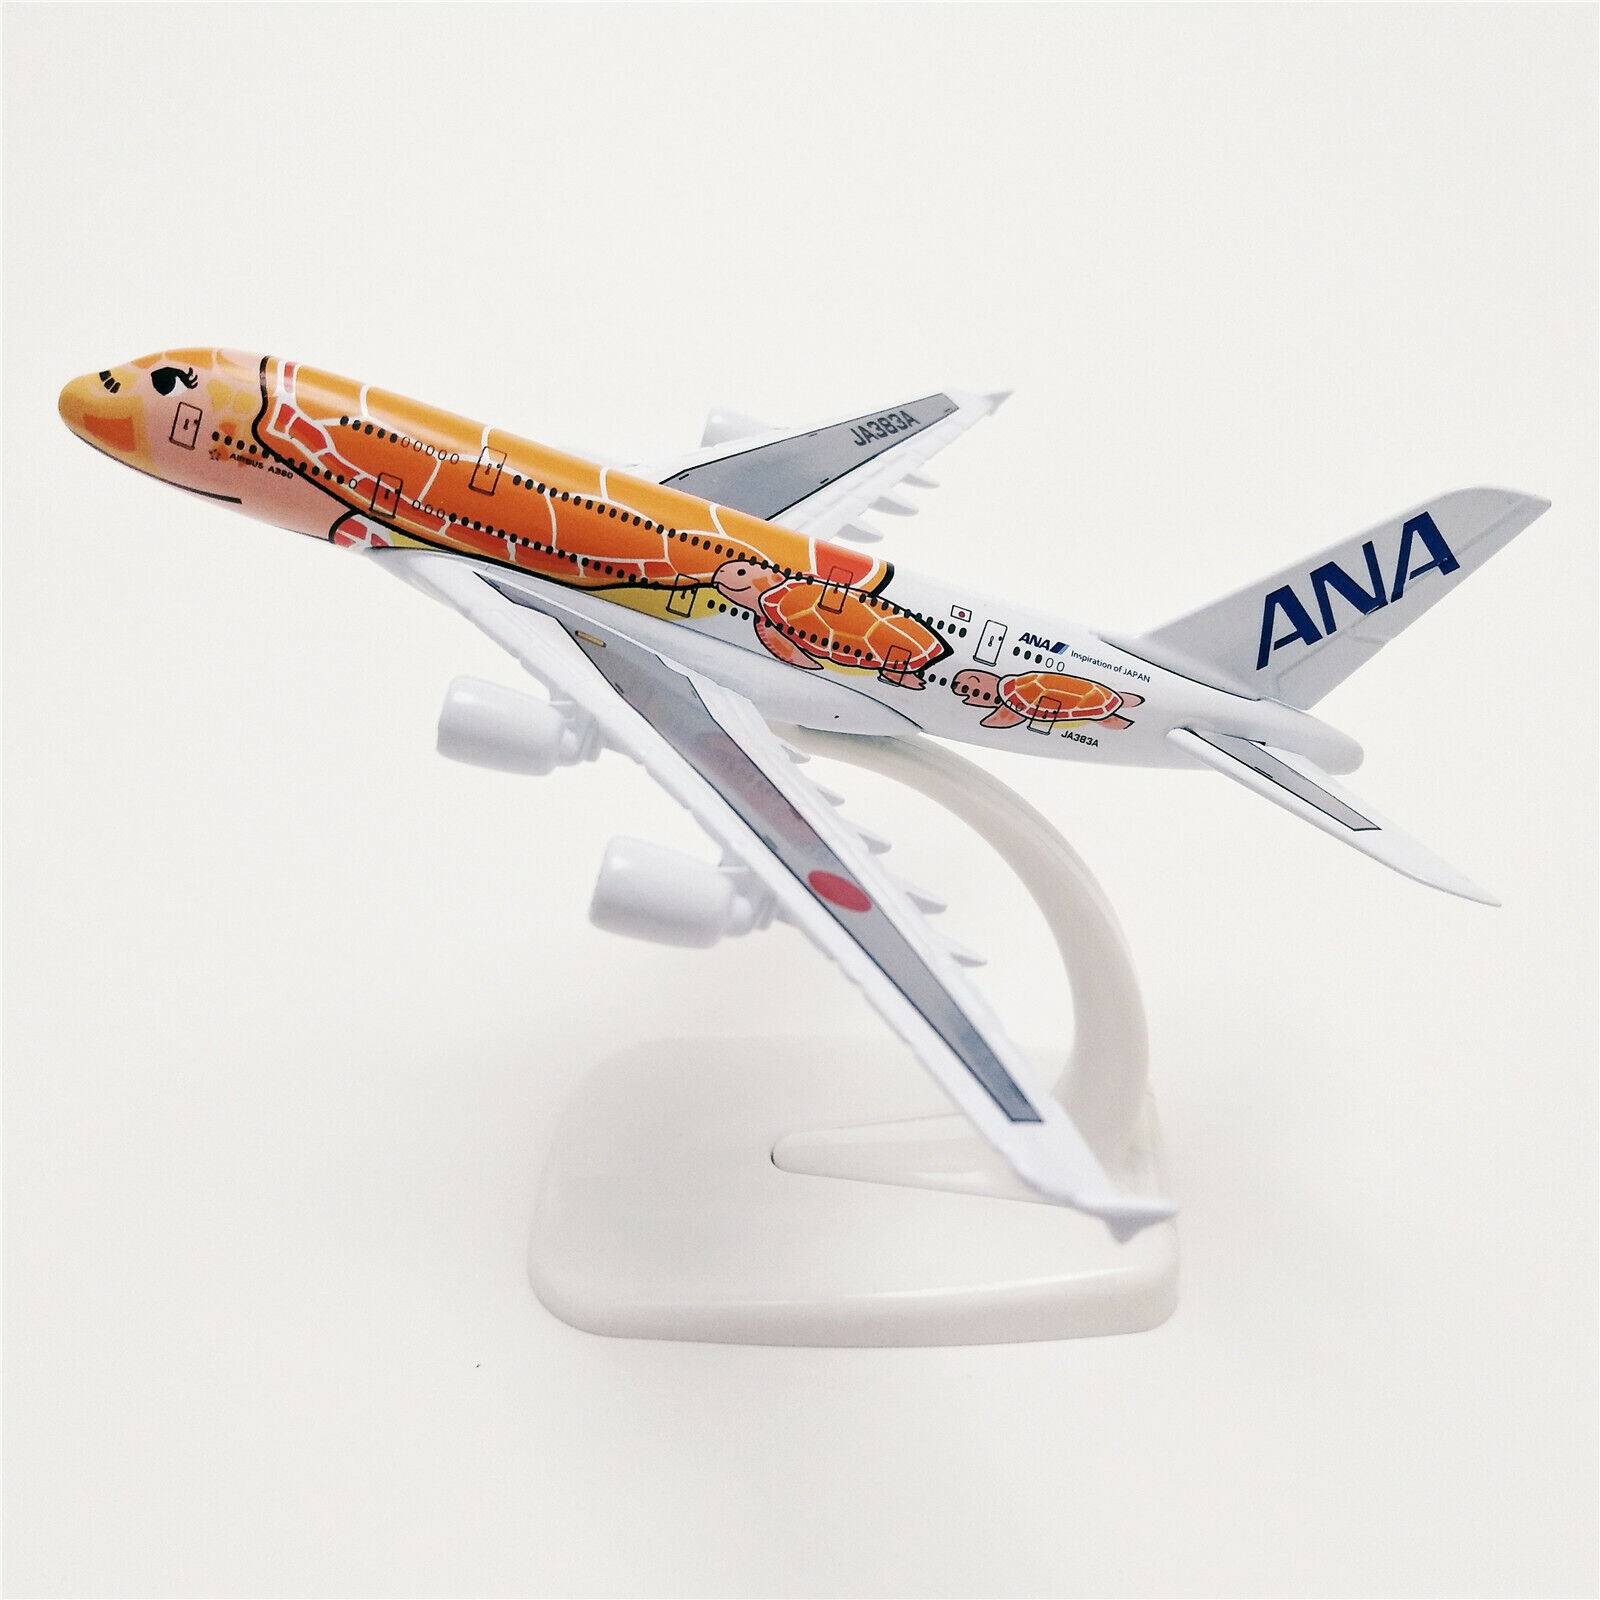 NEW 16cm Airplane Model Plane Air Japan ANA Airlines Airbus A380 Turtle Orange